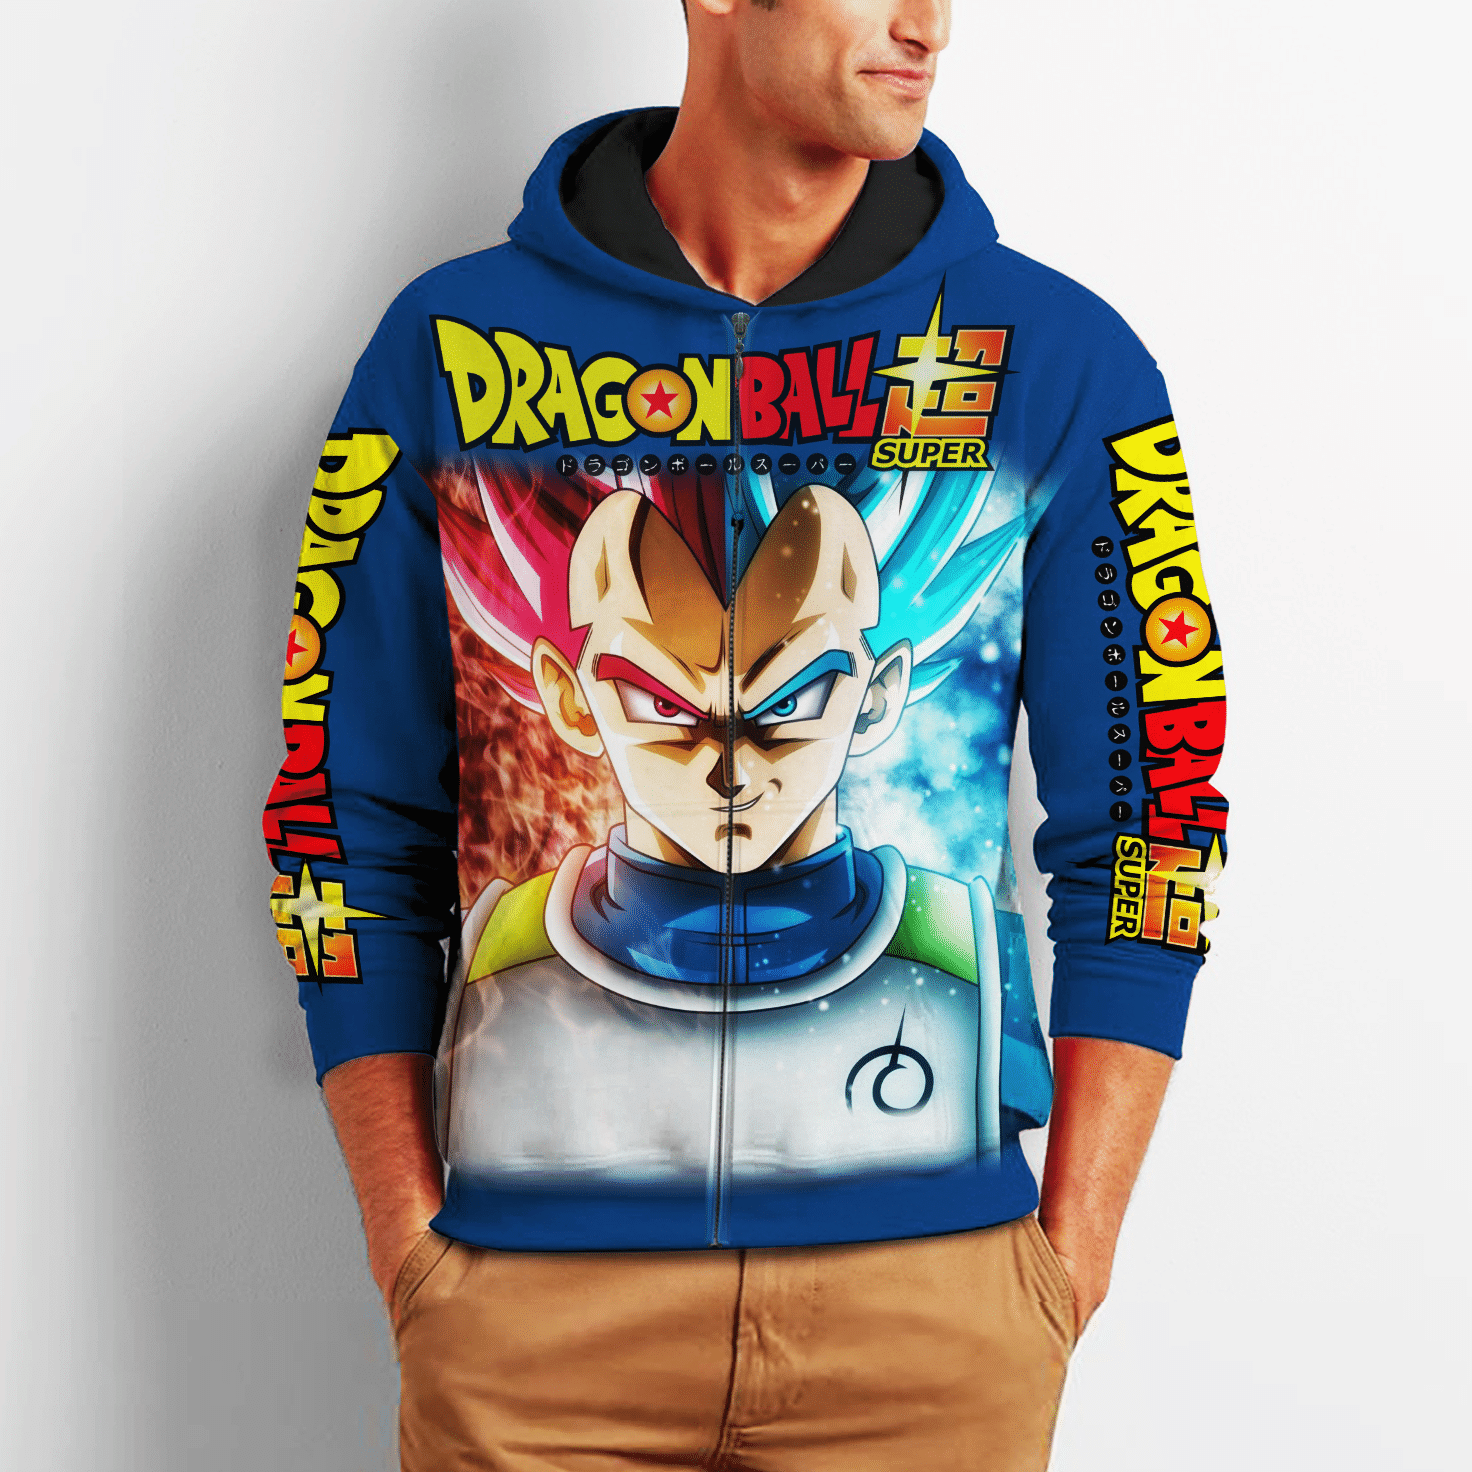 Prince Vegeta Zip All Over Printed 3D Shirt Cosplay Dragon Ball Anime Fans Fan Gift Product Photo 2 Product photo 2